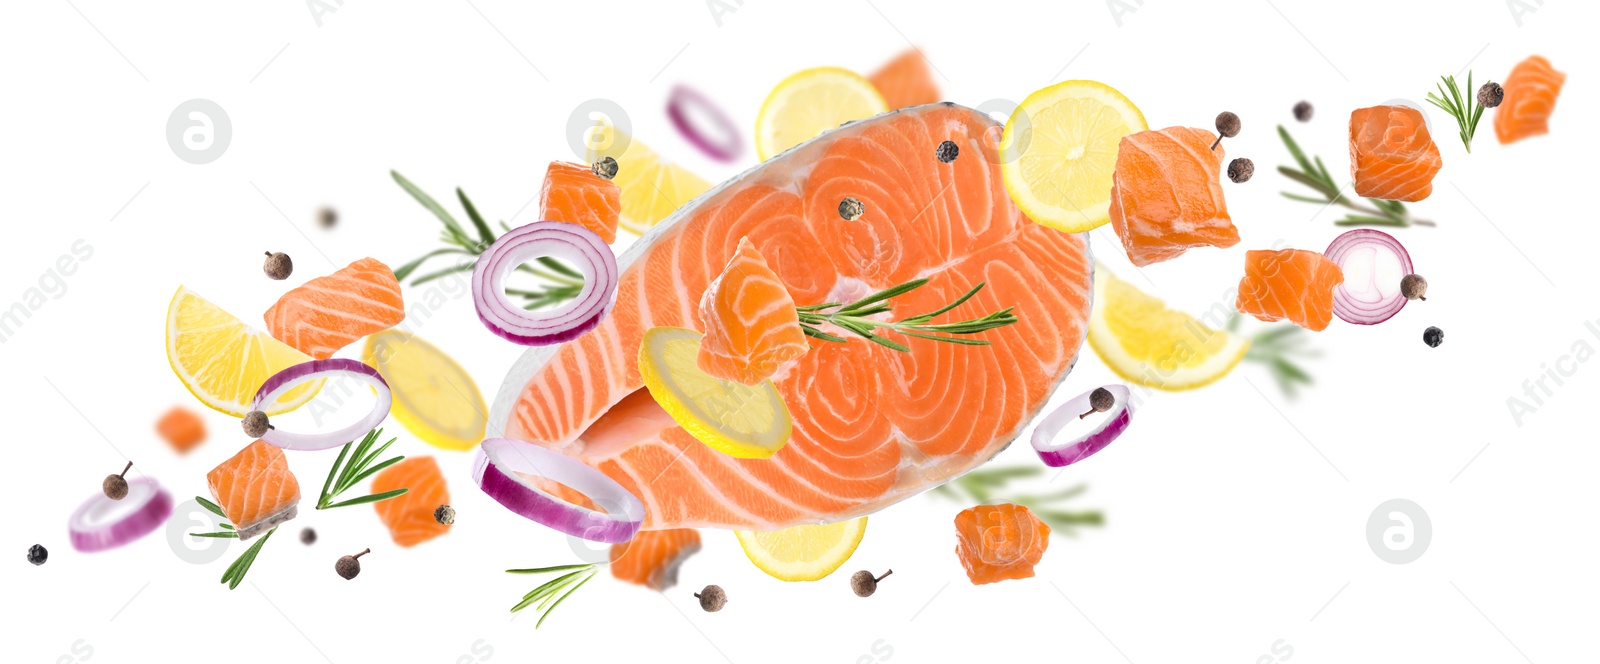 Image of Delicious fresh raw salmon and different spices on white background. Banner design 